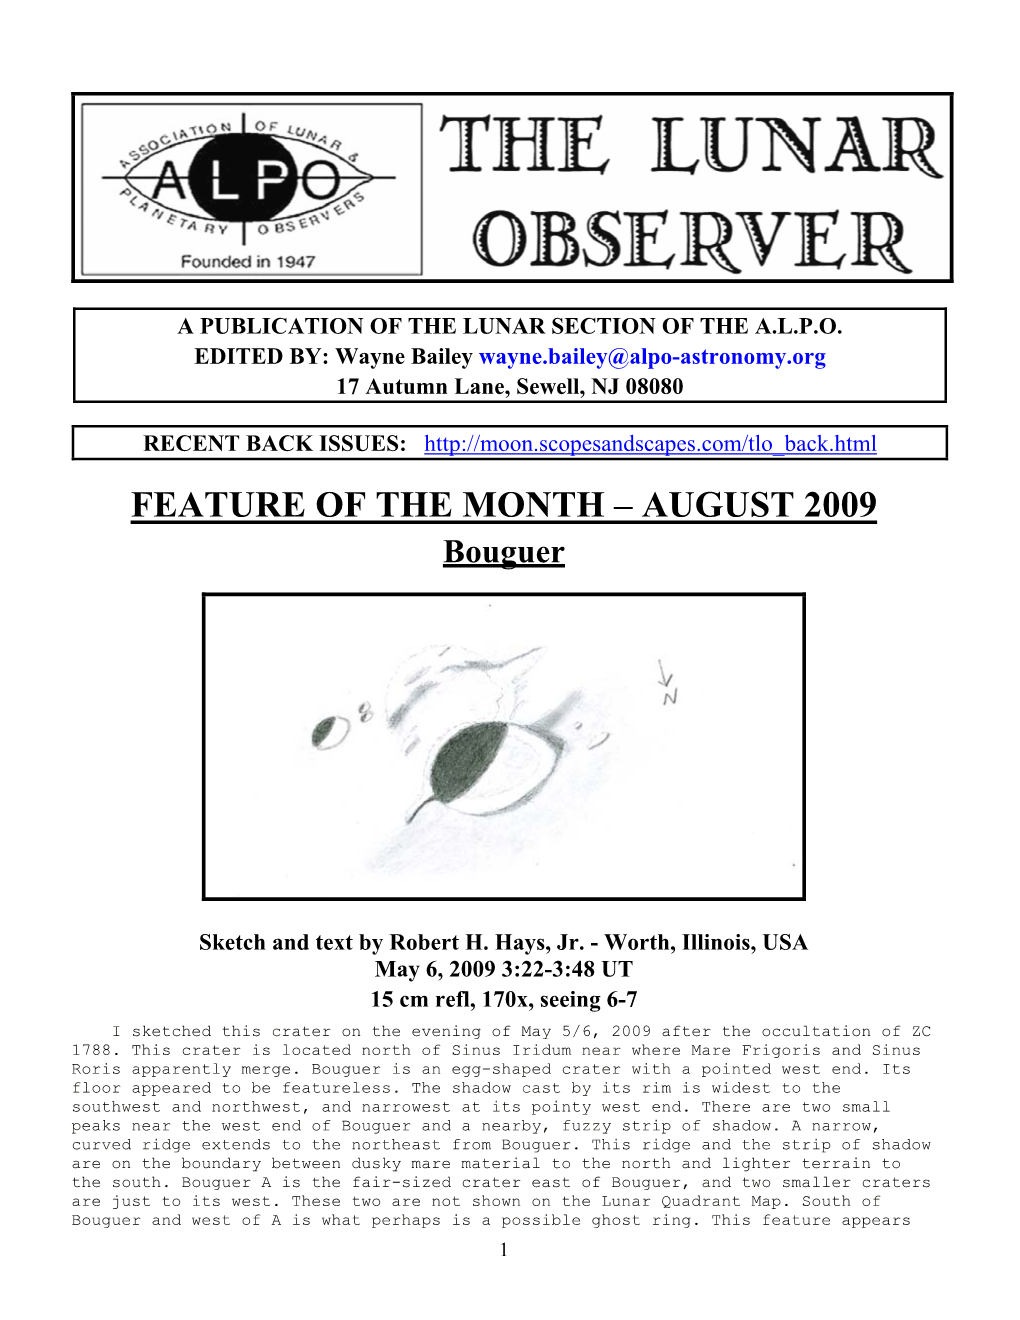 FEATURE of the MONTH – AUGUST 2009 Bouguer